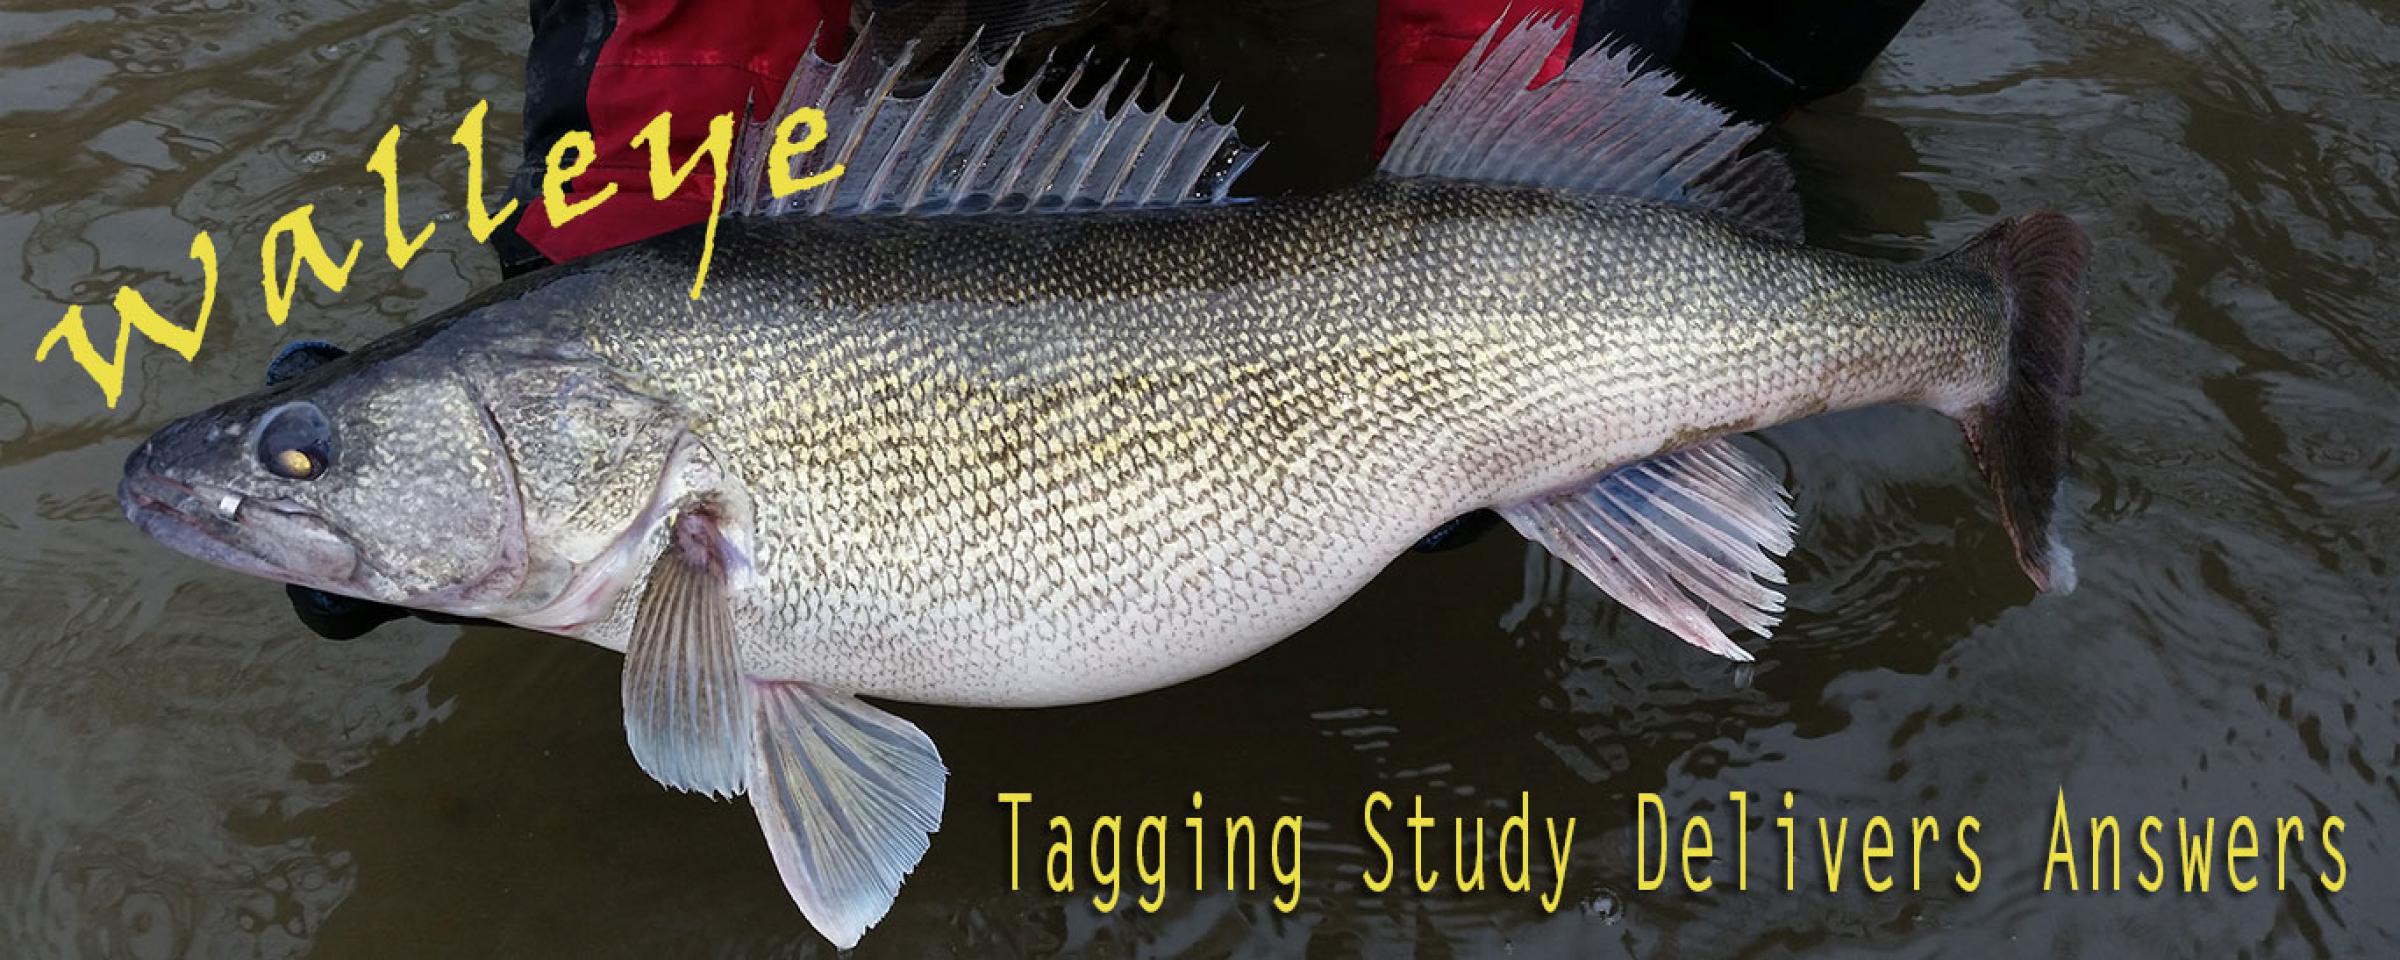 It pays to be aware of walleye migration patterns